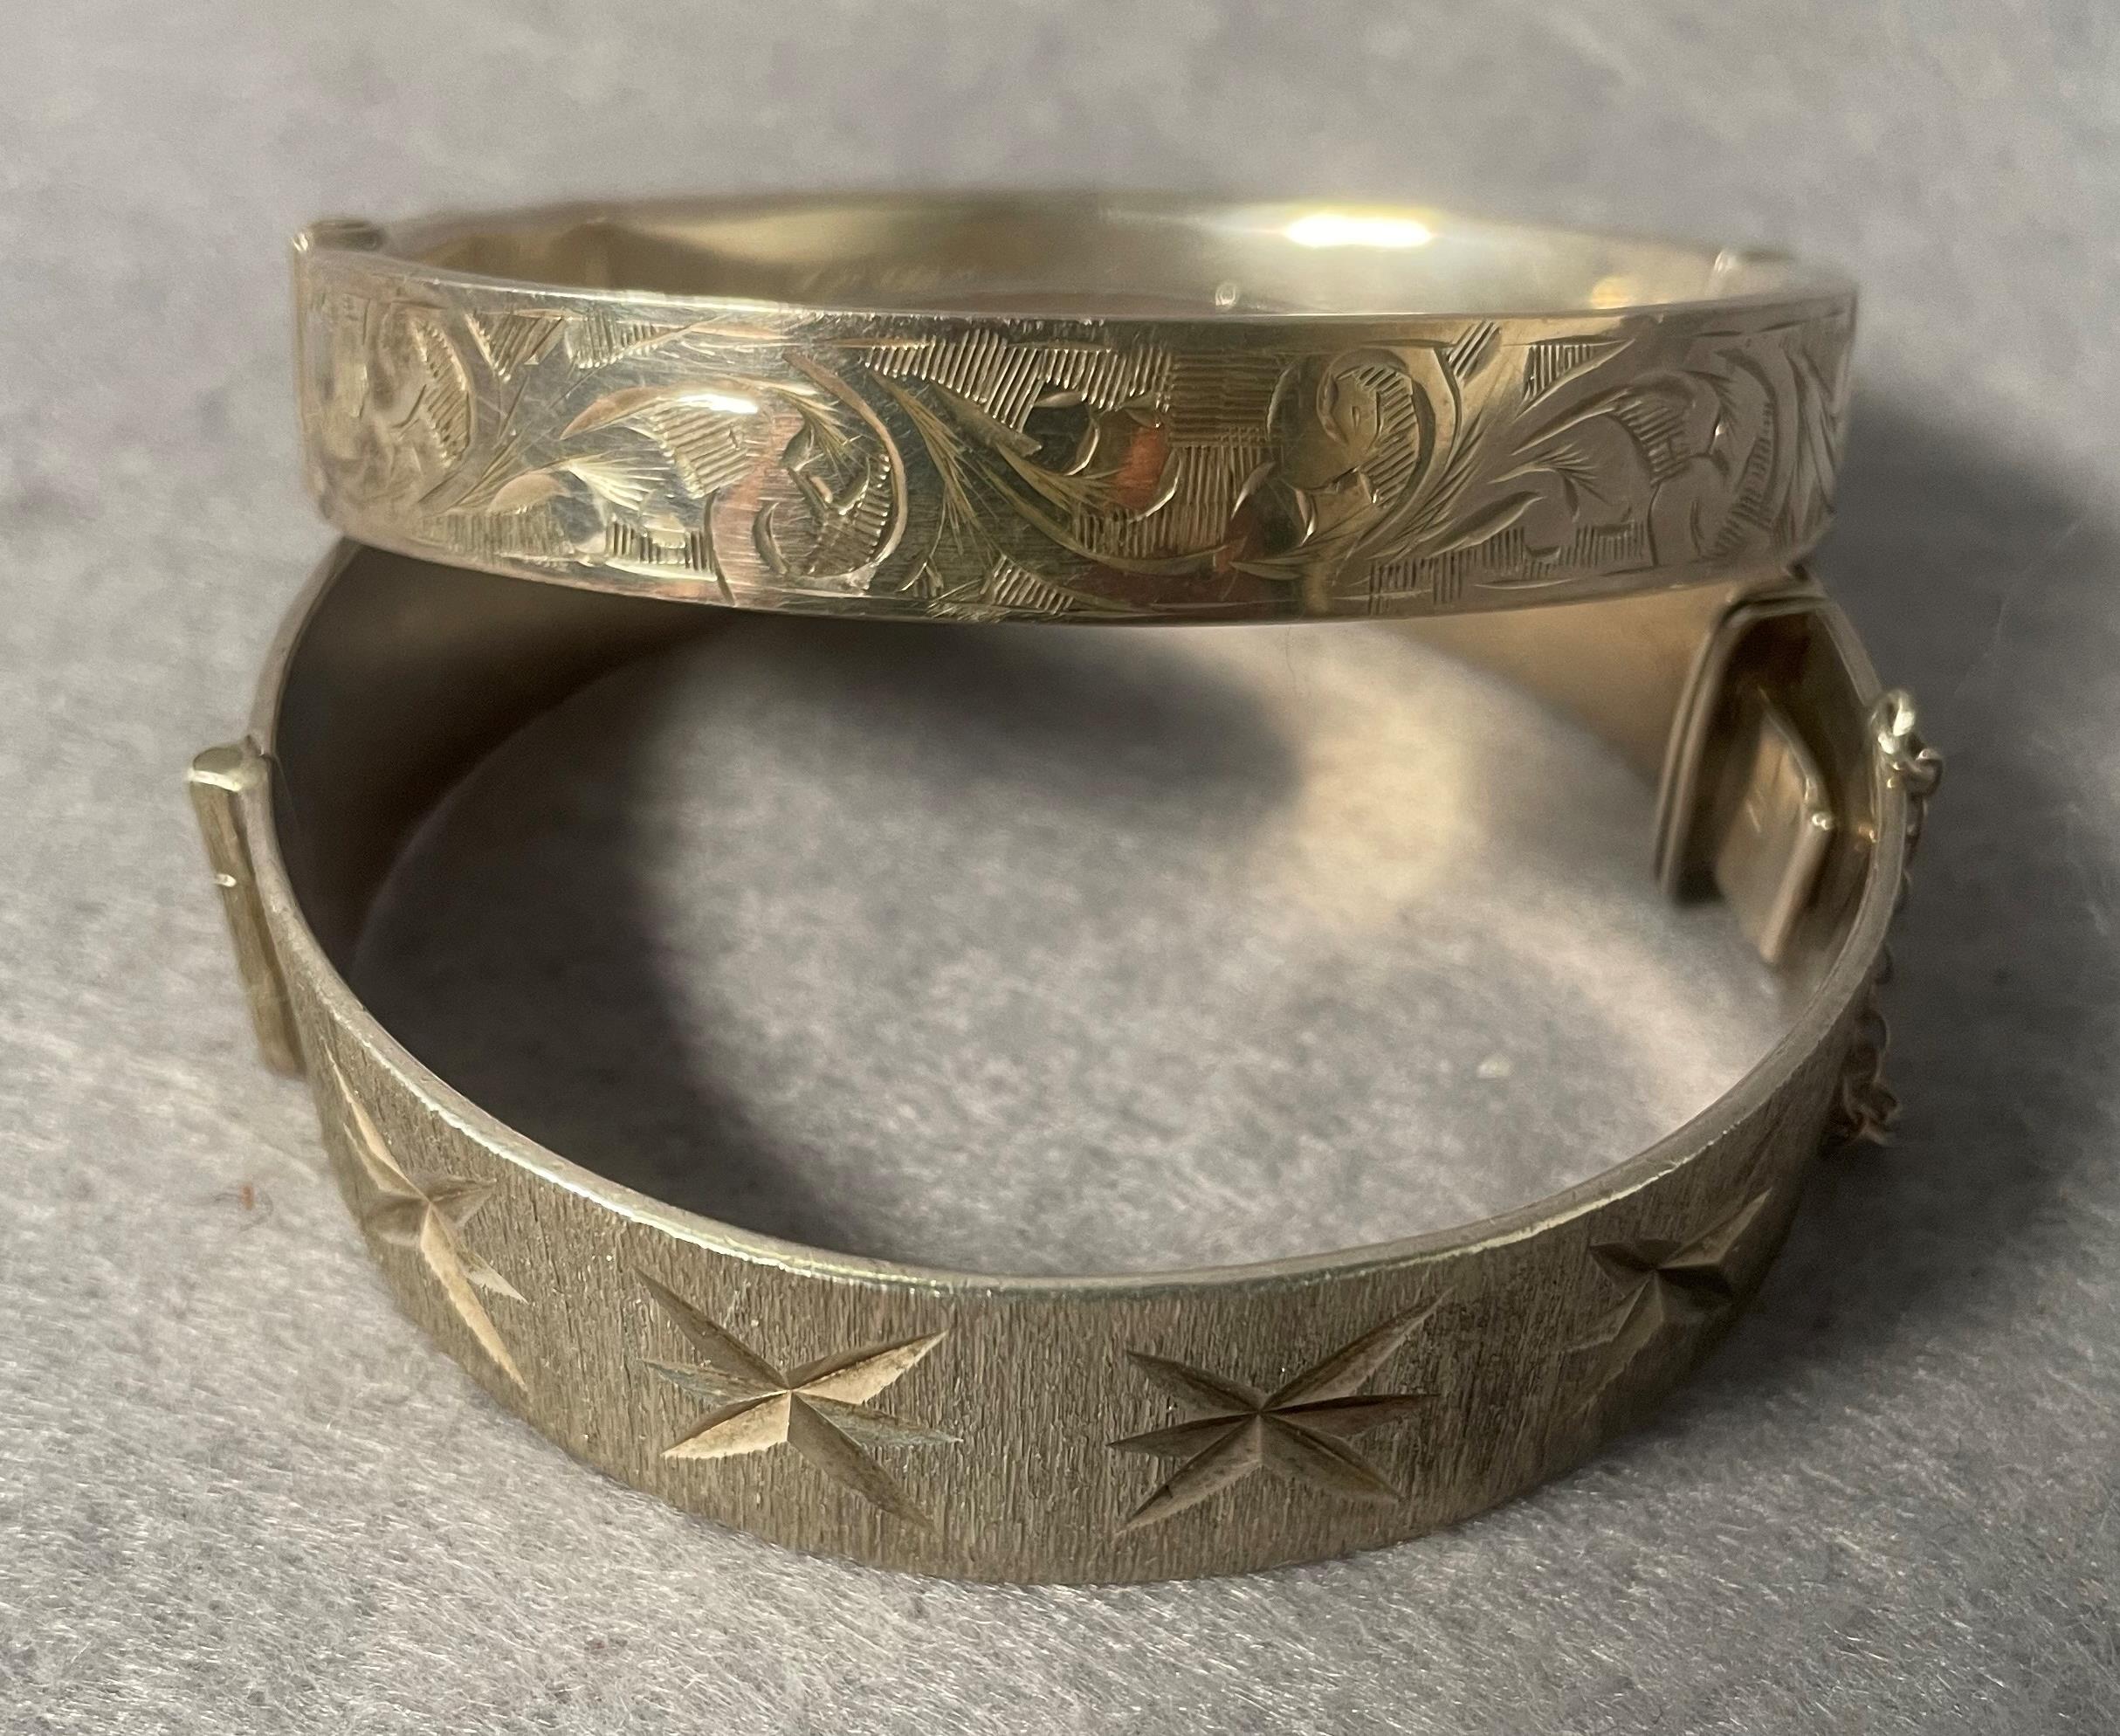 Two assorted silver hallmarked bangles including Birmingham 1968 etched floral design and a Chester